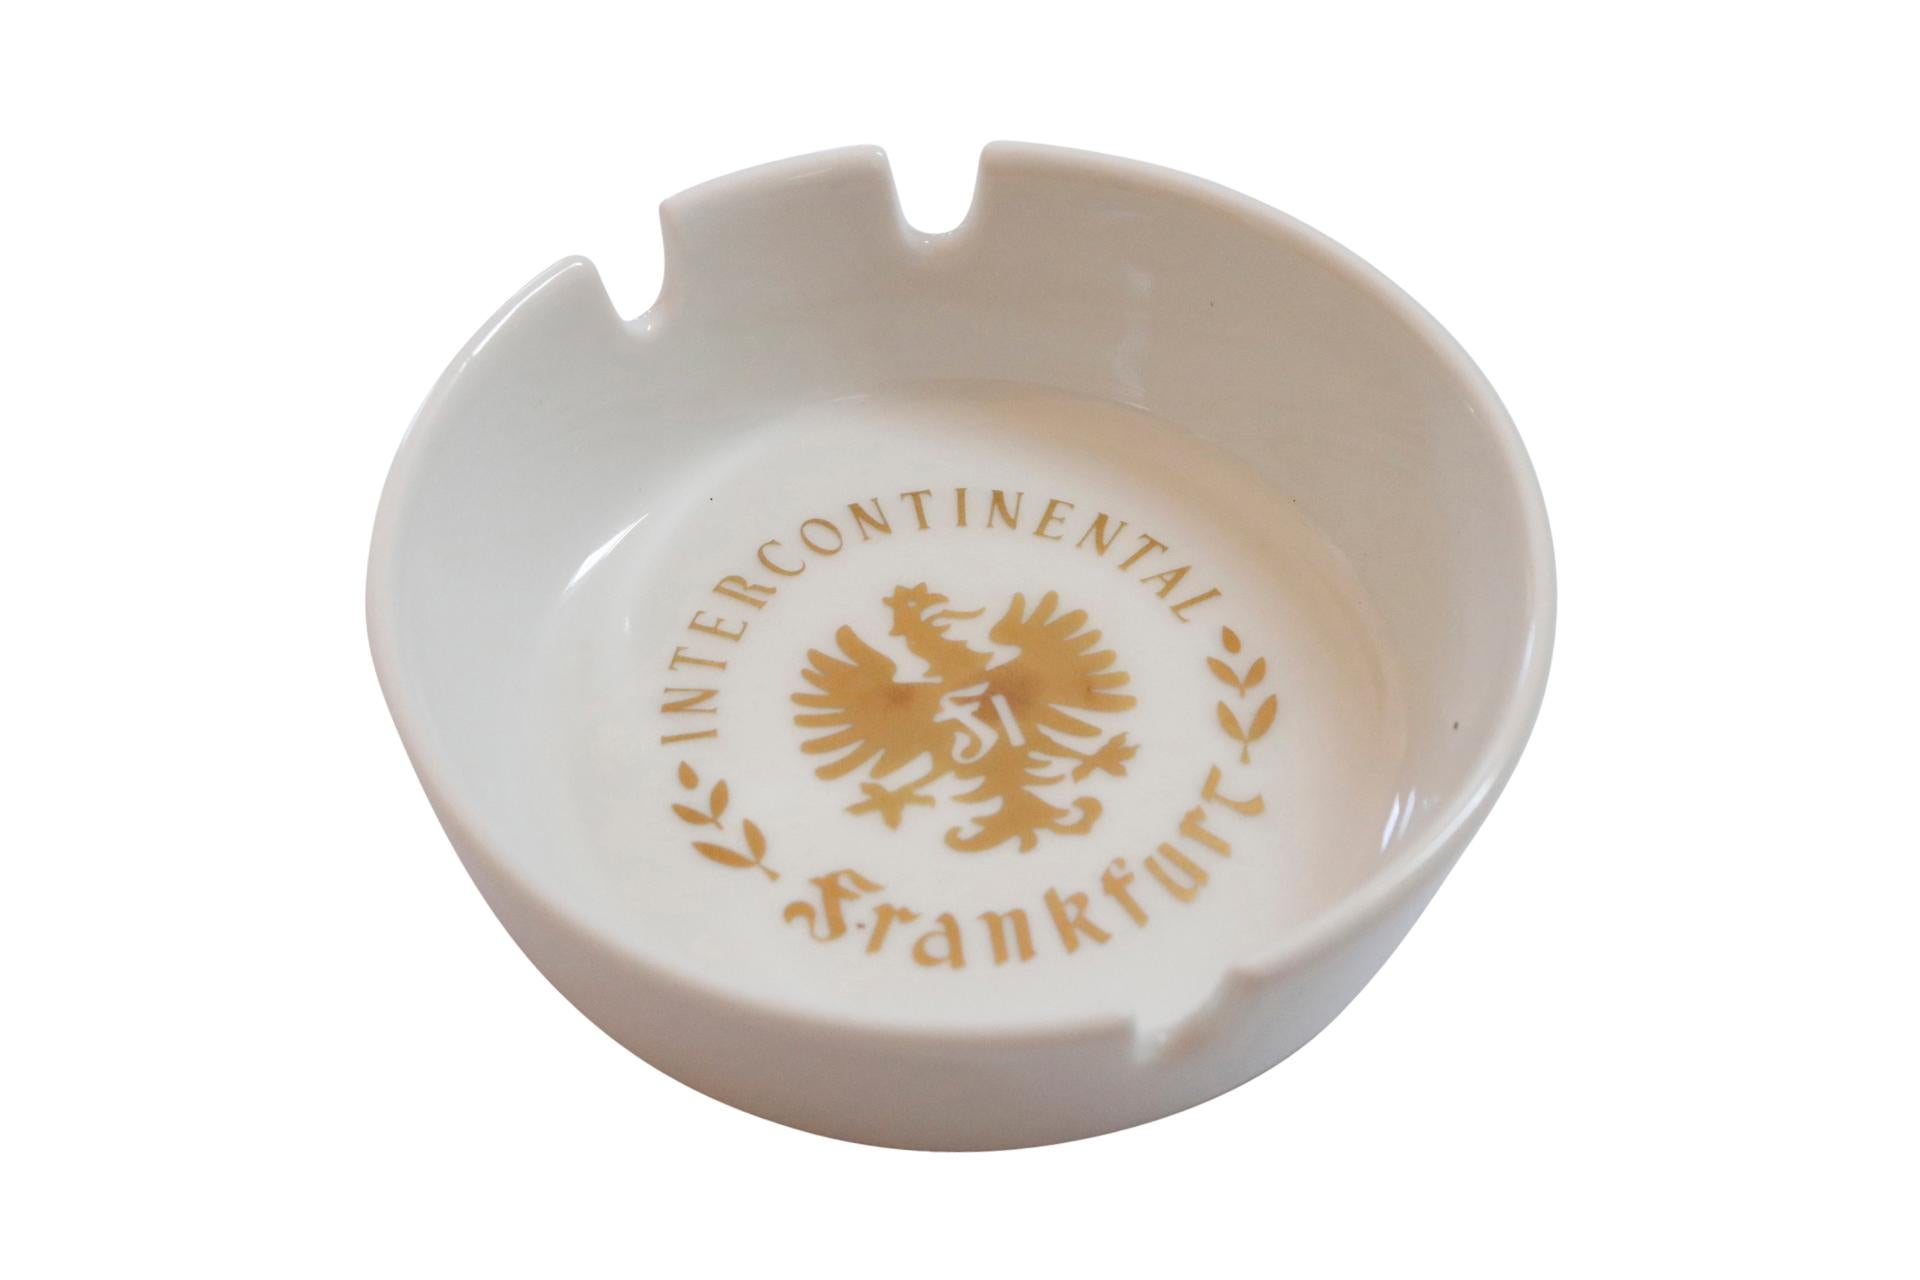 A cream ceramic ashtray from the Intercontinental Hotel in Frankfurt, Germany. The center is printed with the Intercontinental Hotel logo in gold. Marked underneath Schönwold, Germany. Hotel Intercontinental Frankfurt/Deutschland. 